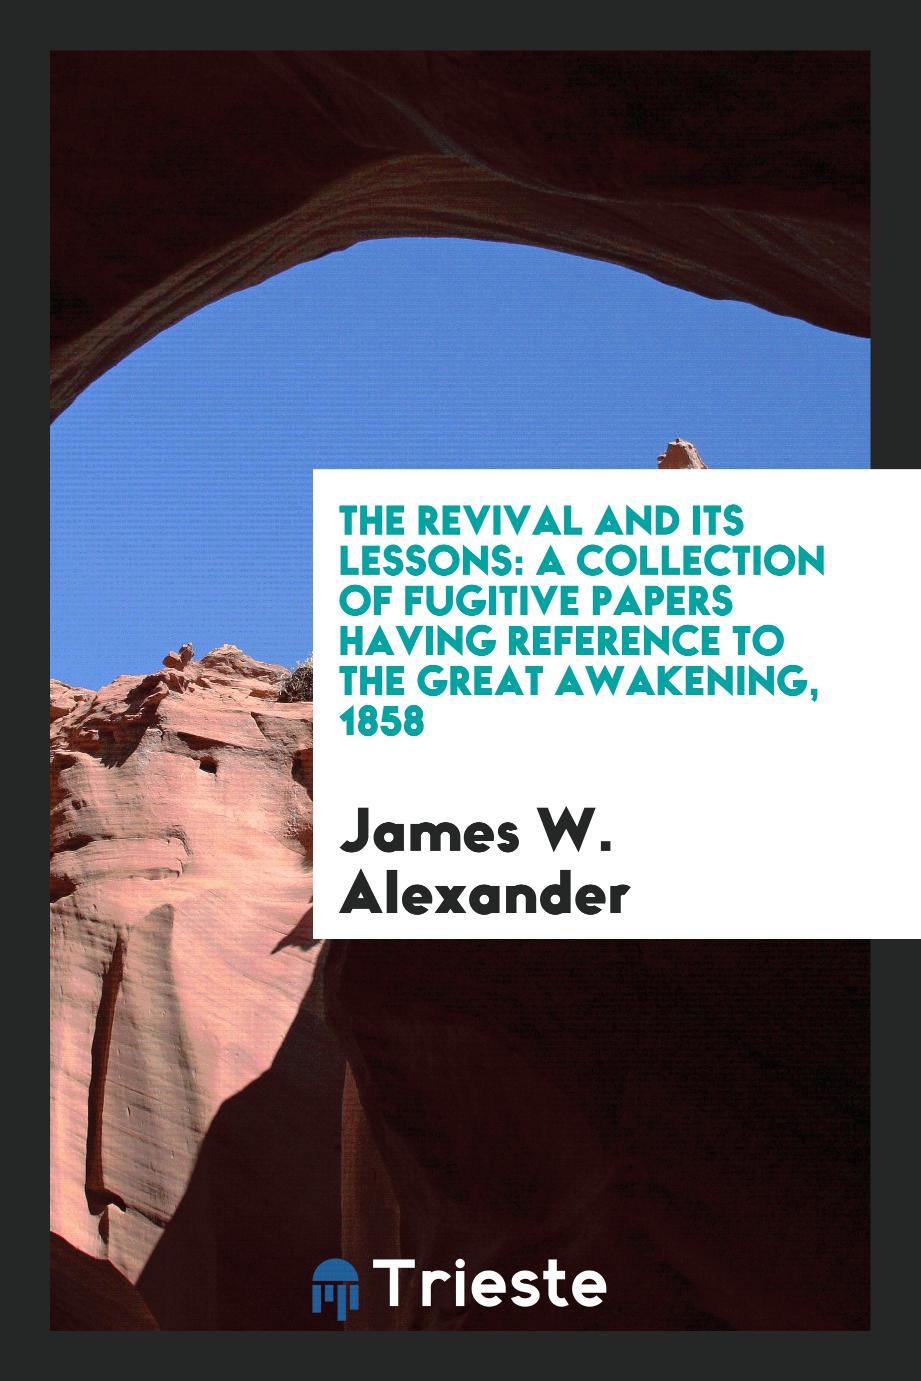 The Revival and Its Lessons: A Collection of Fugitive Papers Having Reference to the Great Awakening, 1858